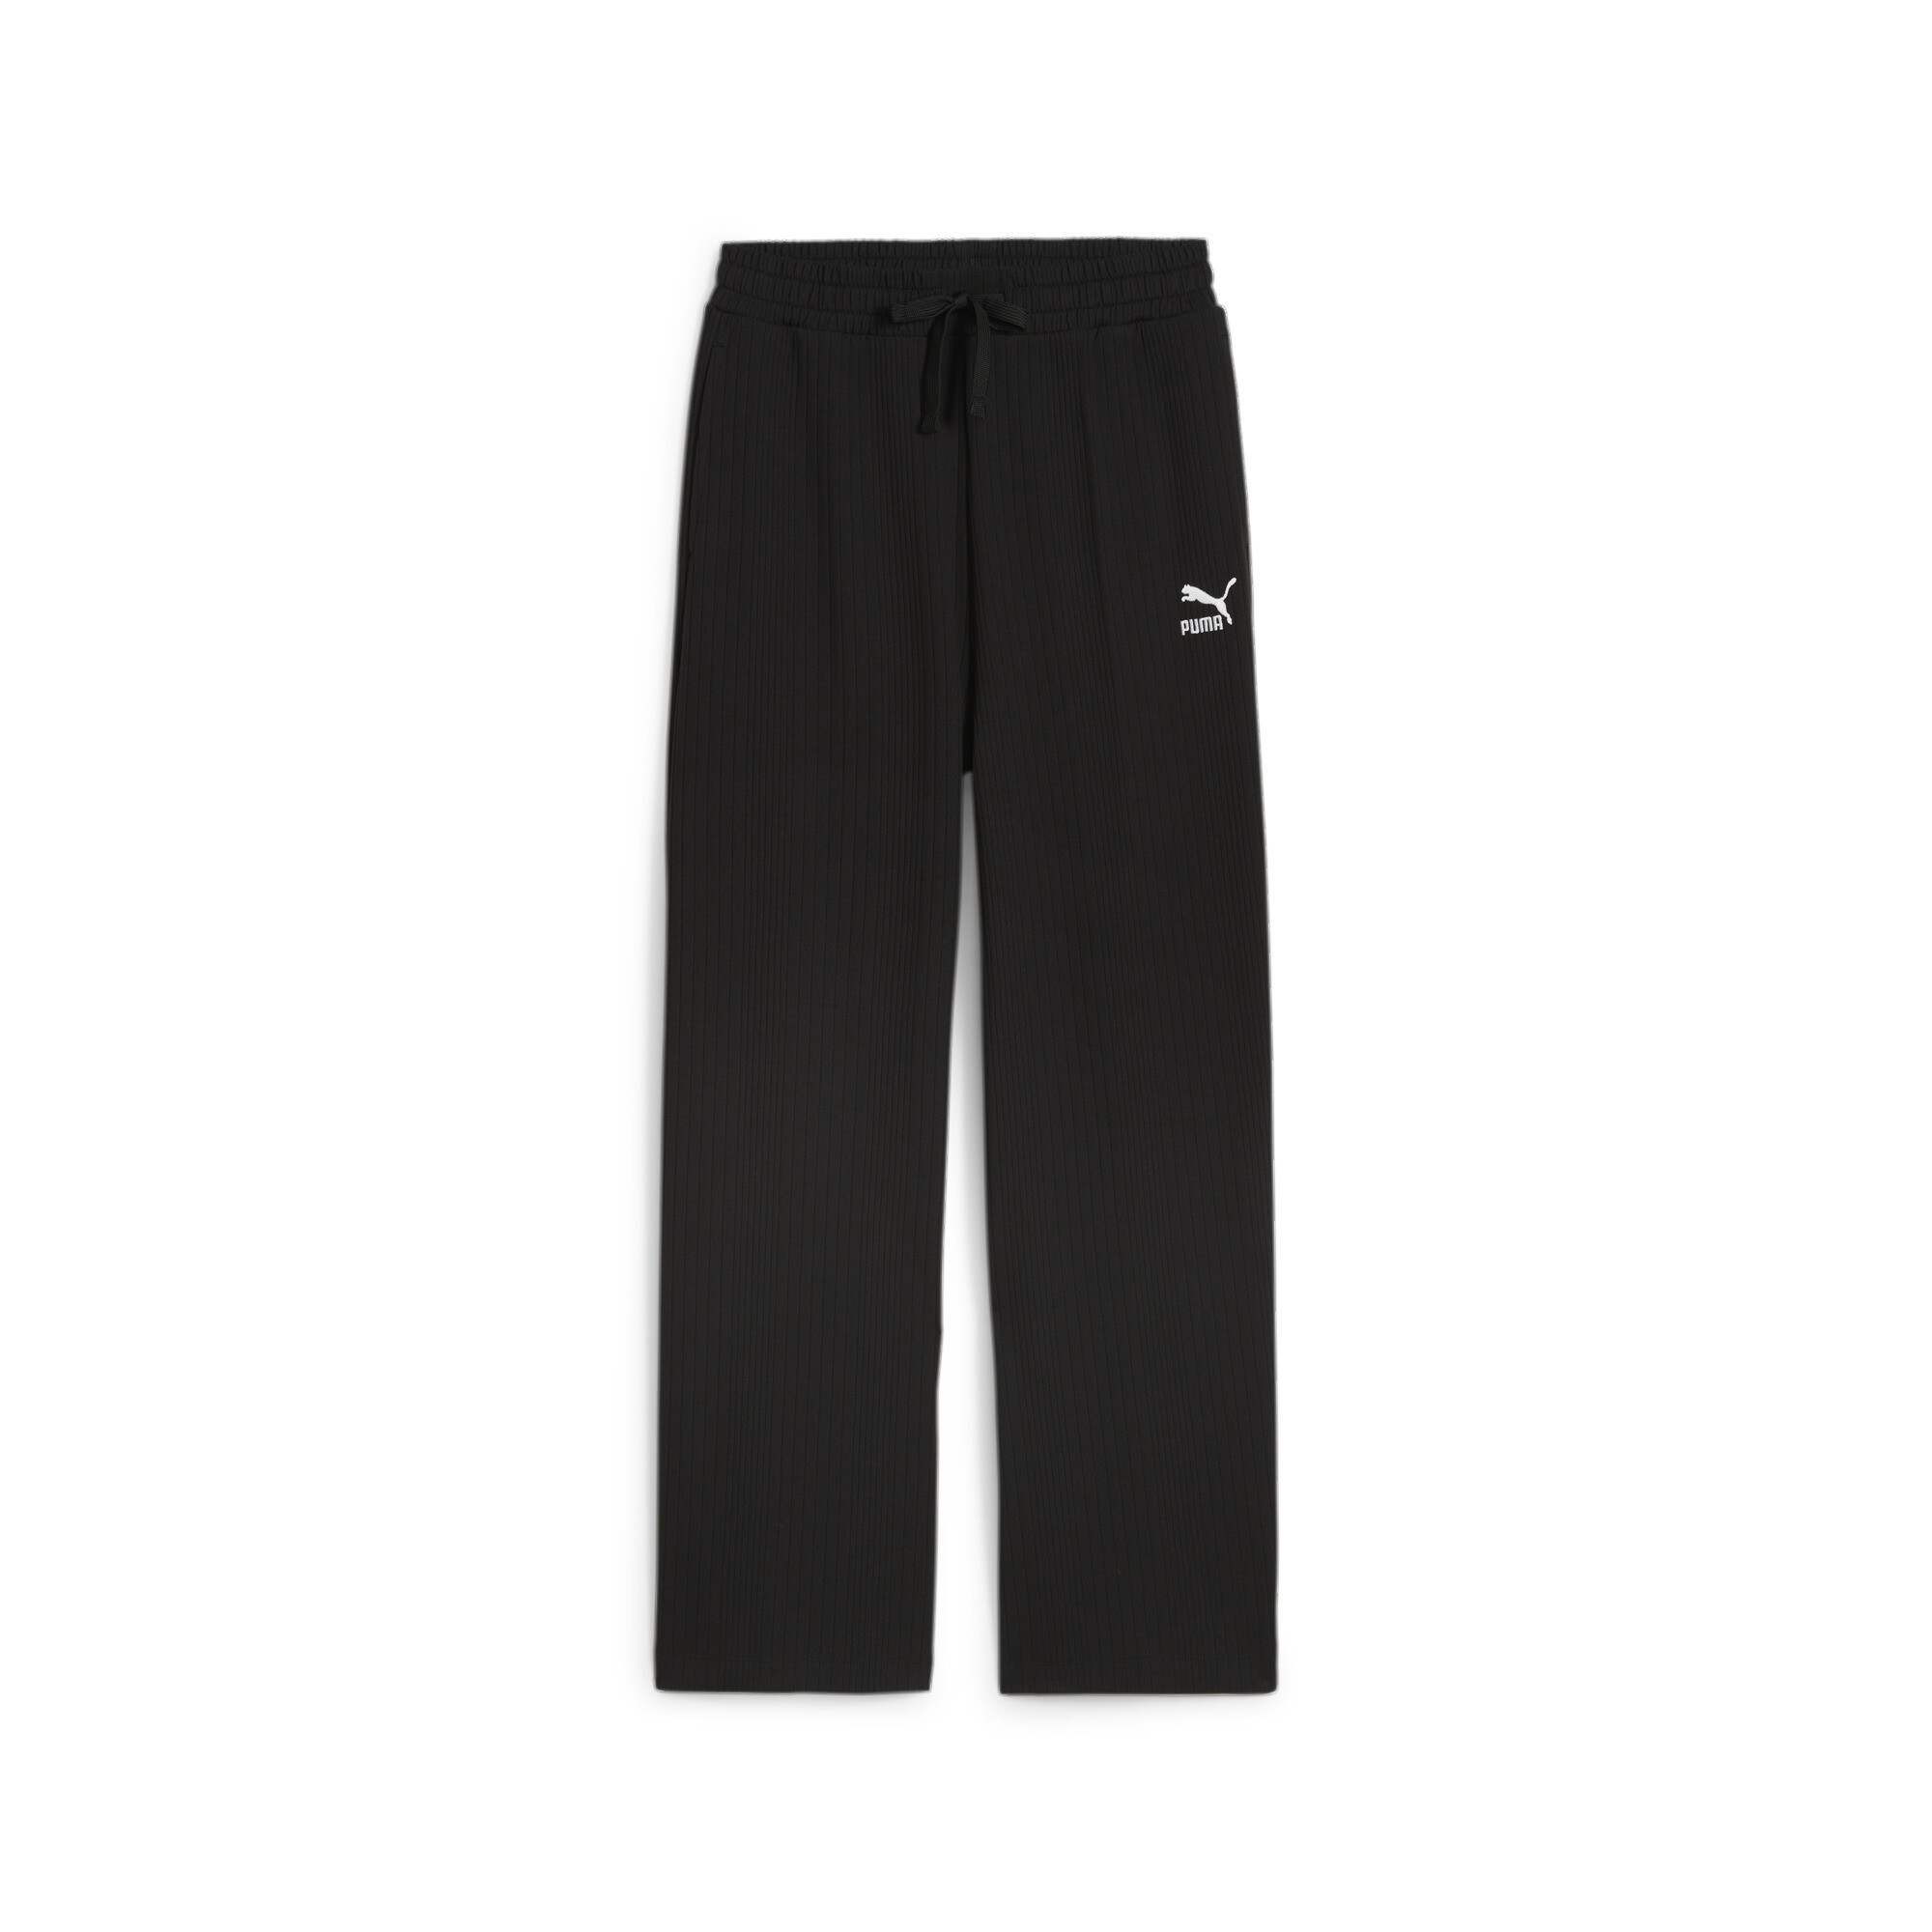 Women's PUMA CLASSICS Ribbed Relaxed Sweatpant In Black, Size XL